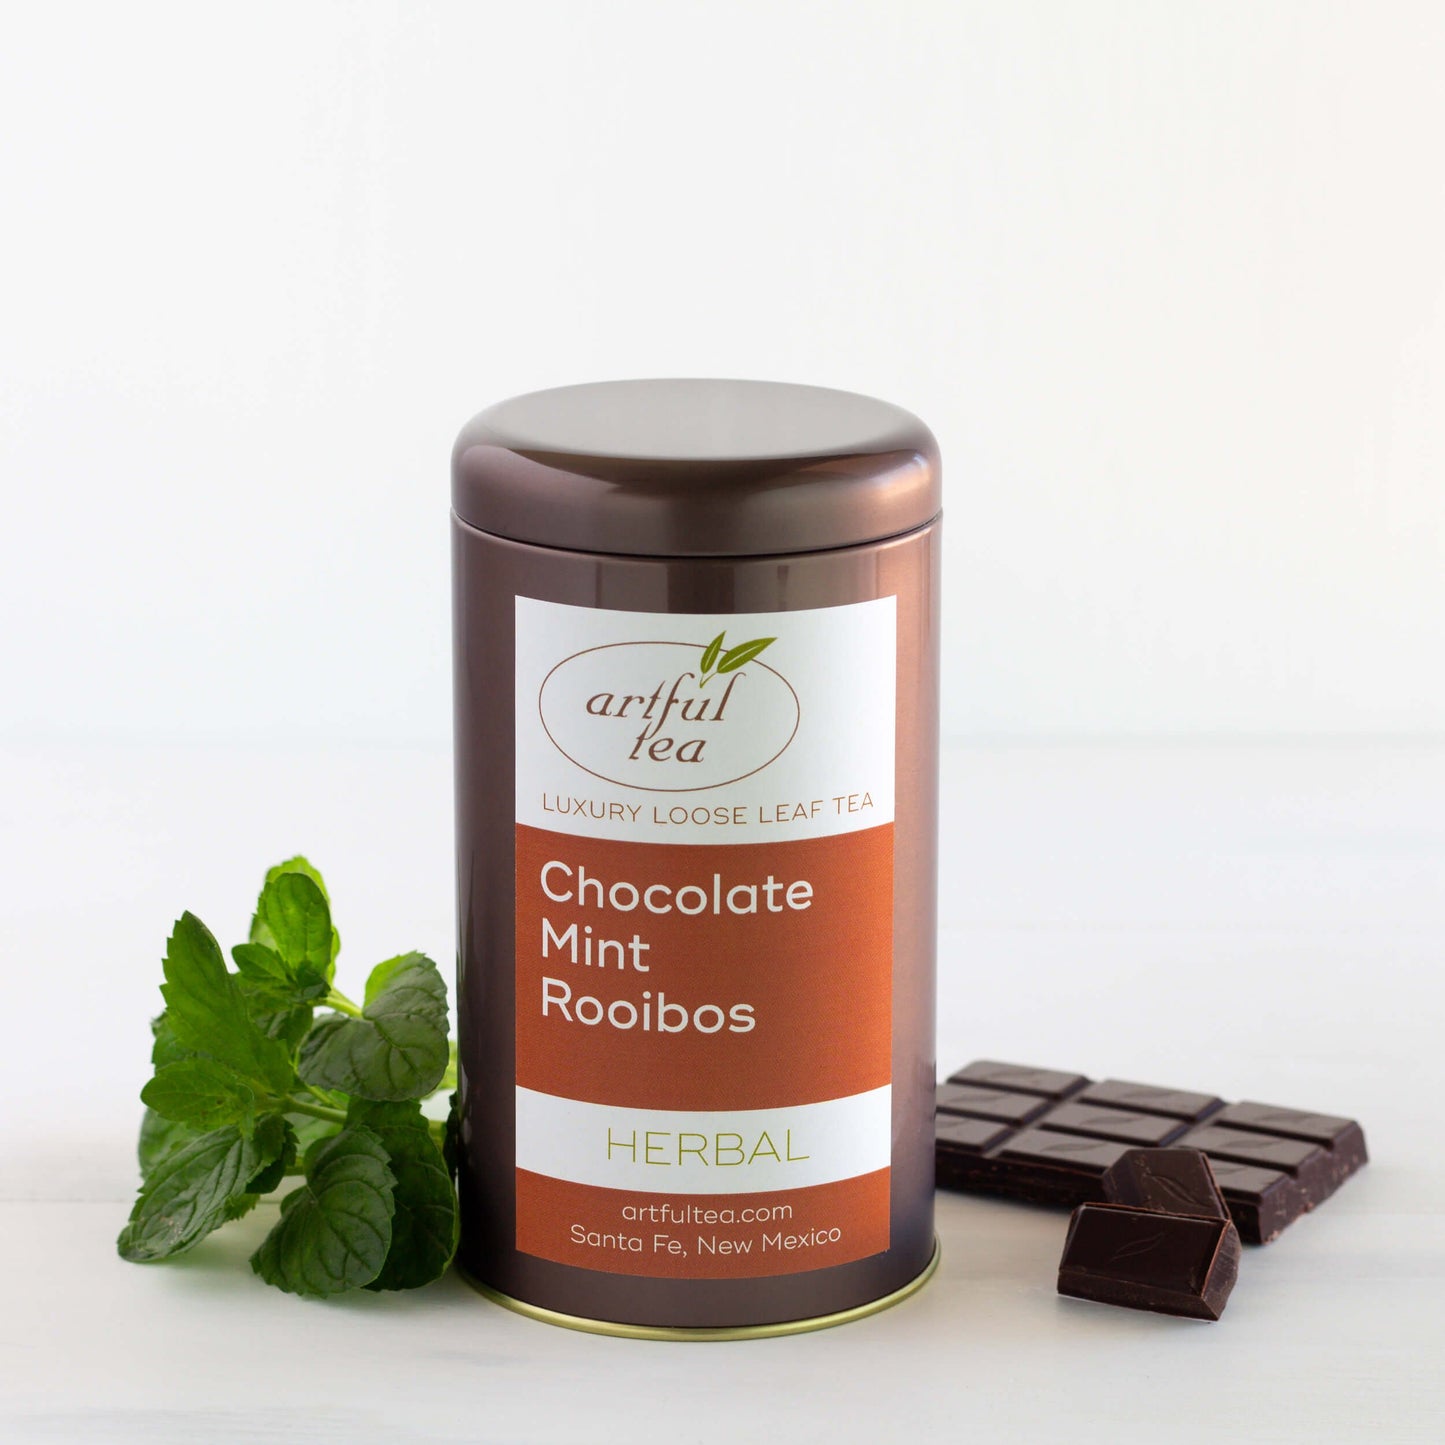 Chocolate Mint Rooibos herbal tea shown packaged in a brown tin, surrounded by fresh mint leaves and a bar of chocolate